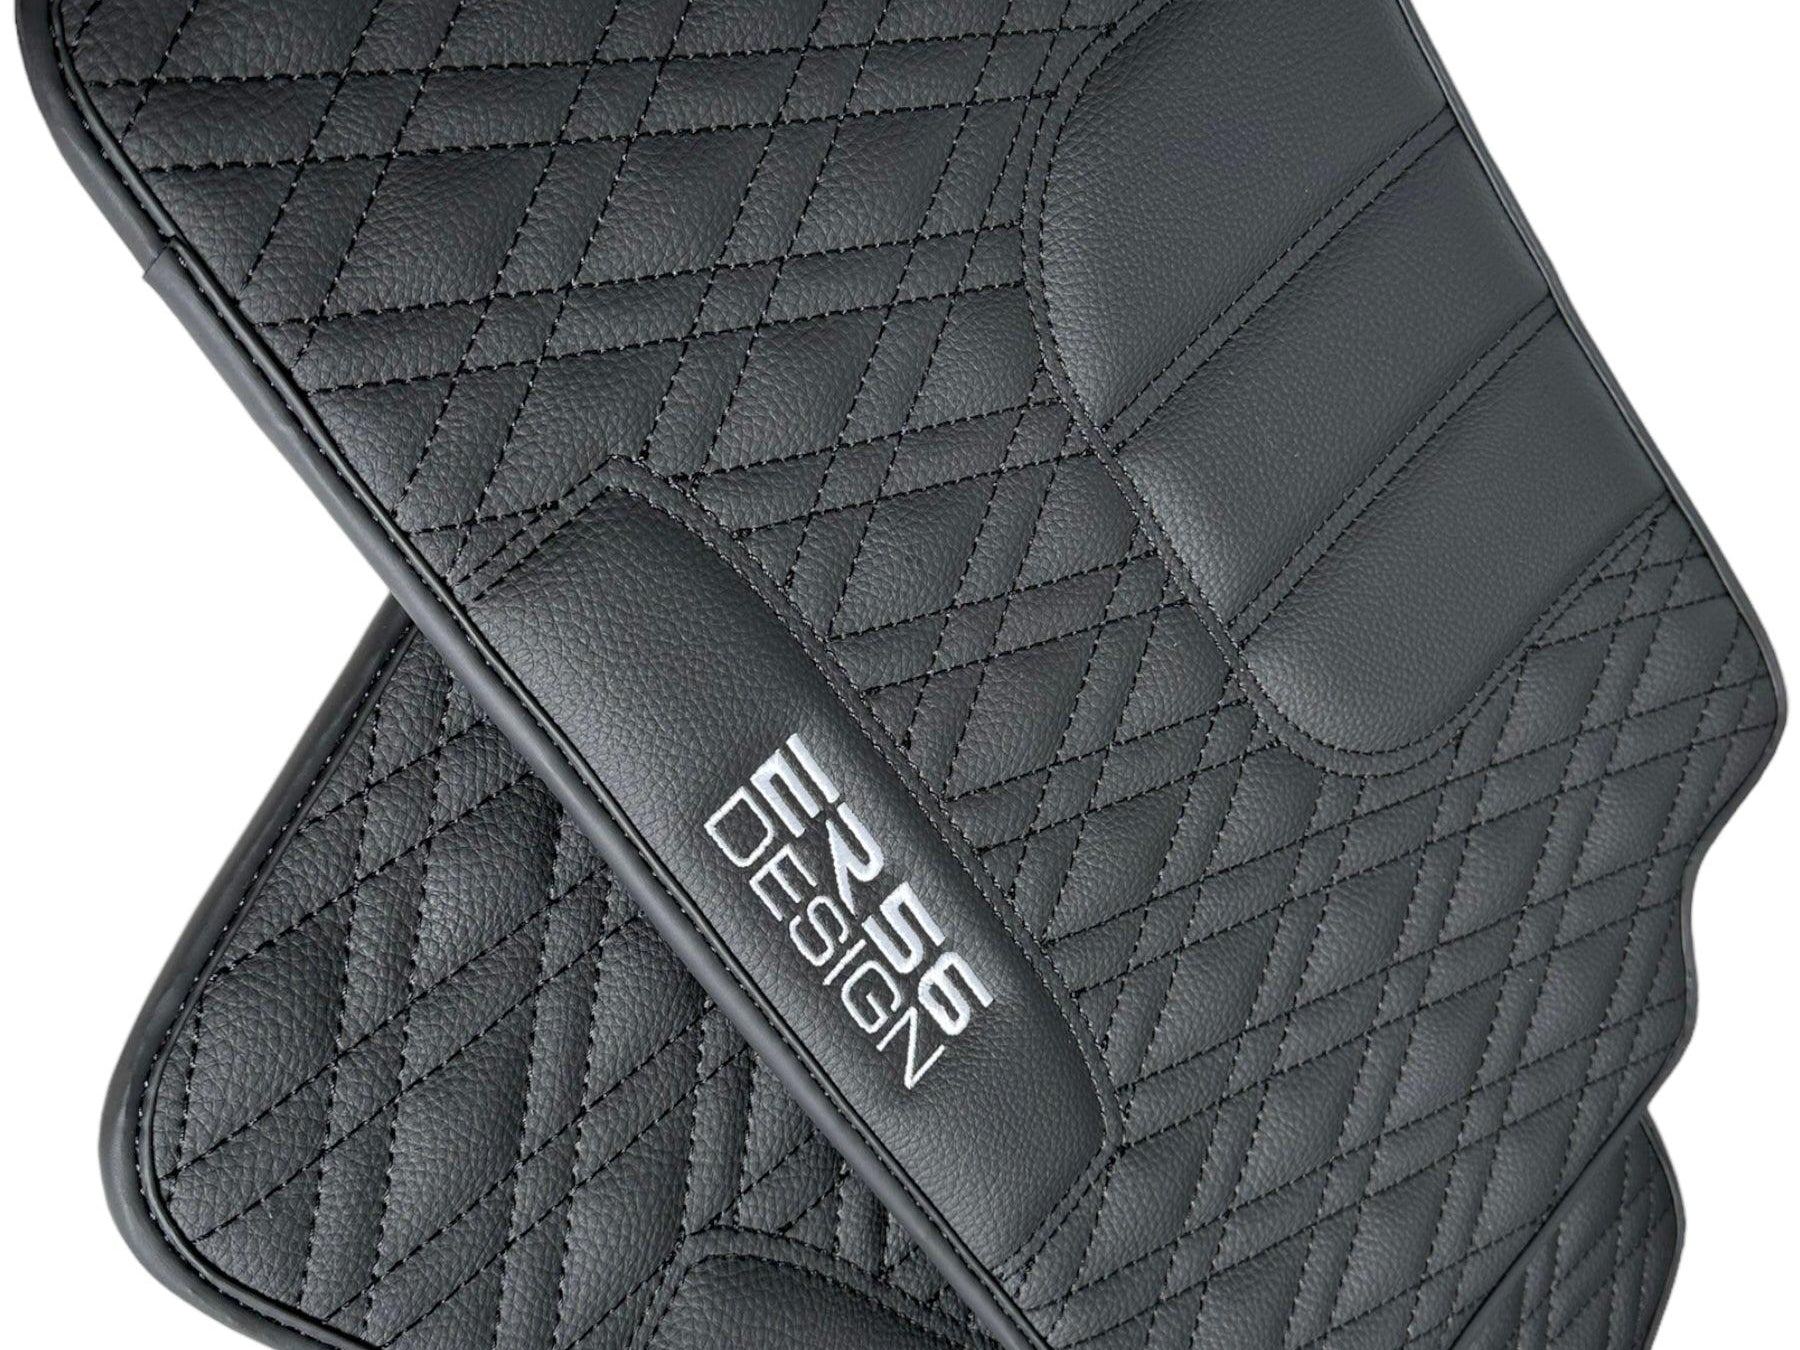 Floor Mats For BMW 3 Series E46 Coupe Black Leather Er56 Design - AutoWin